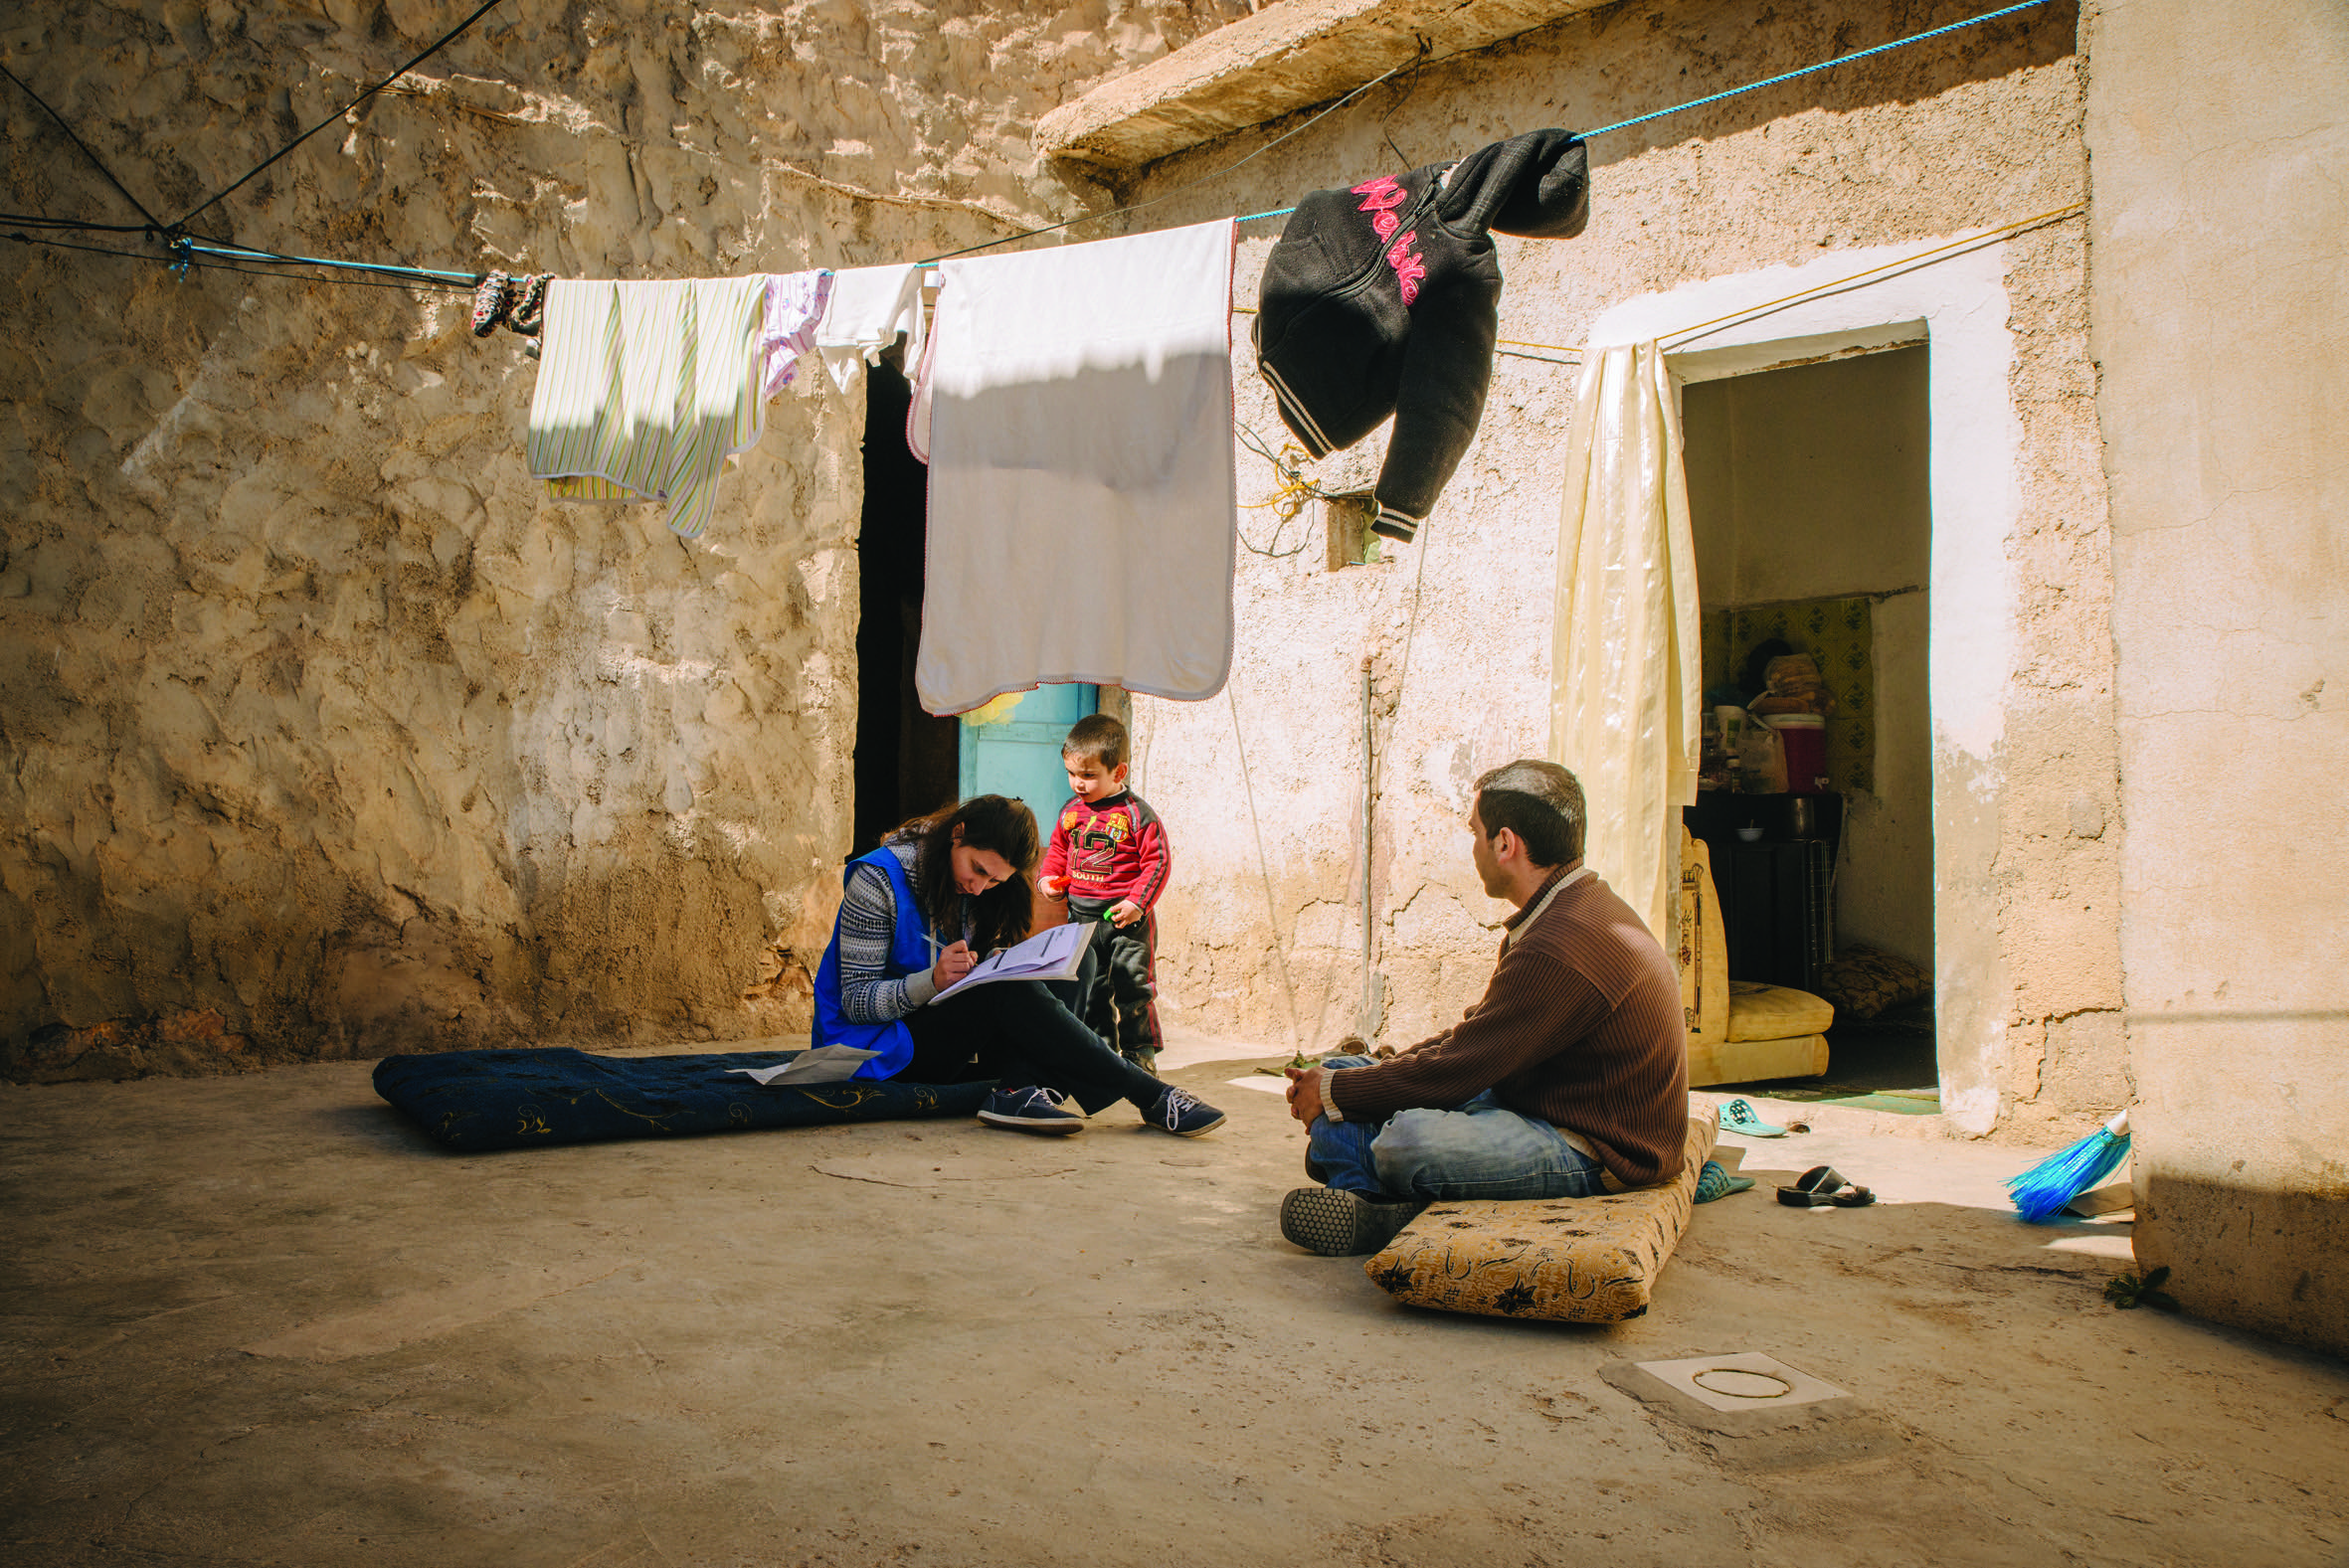 Abu Nasser and his family having fled Syria, lives in a single room near Jordan's southern city of Karak. About half of the Syrian refugees in Karak report not having adequate water and sanitation.